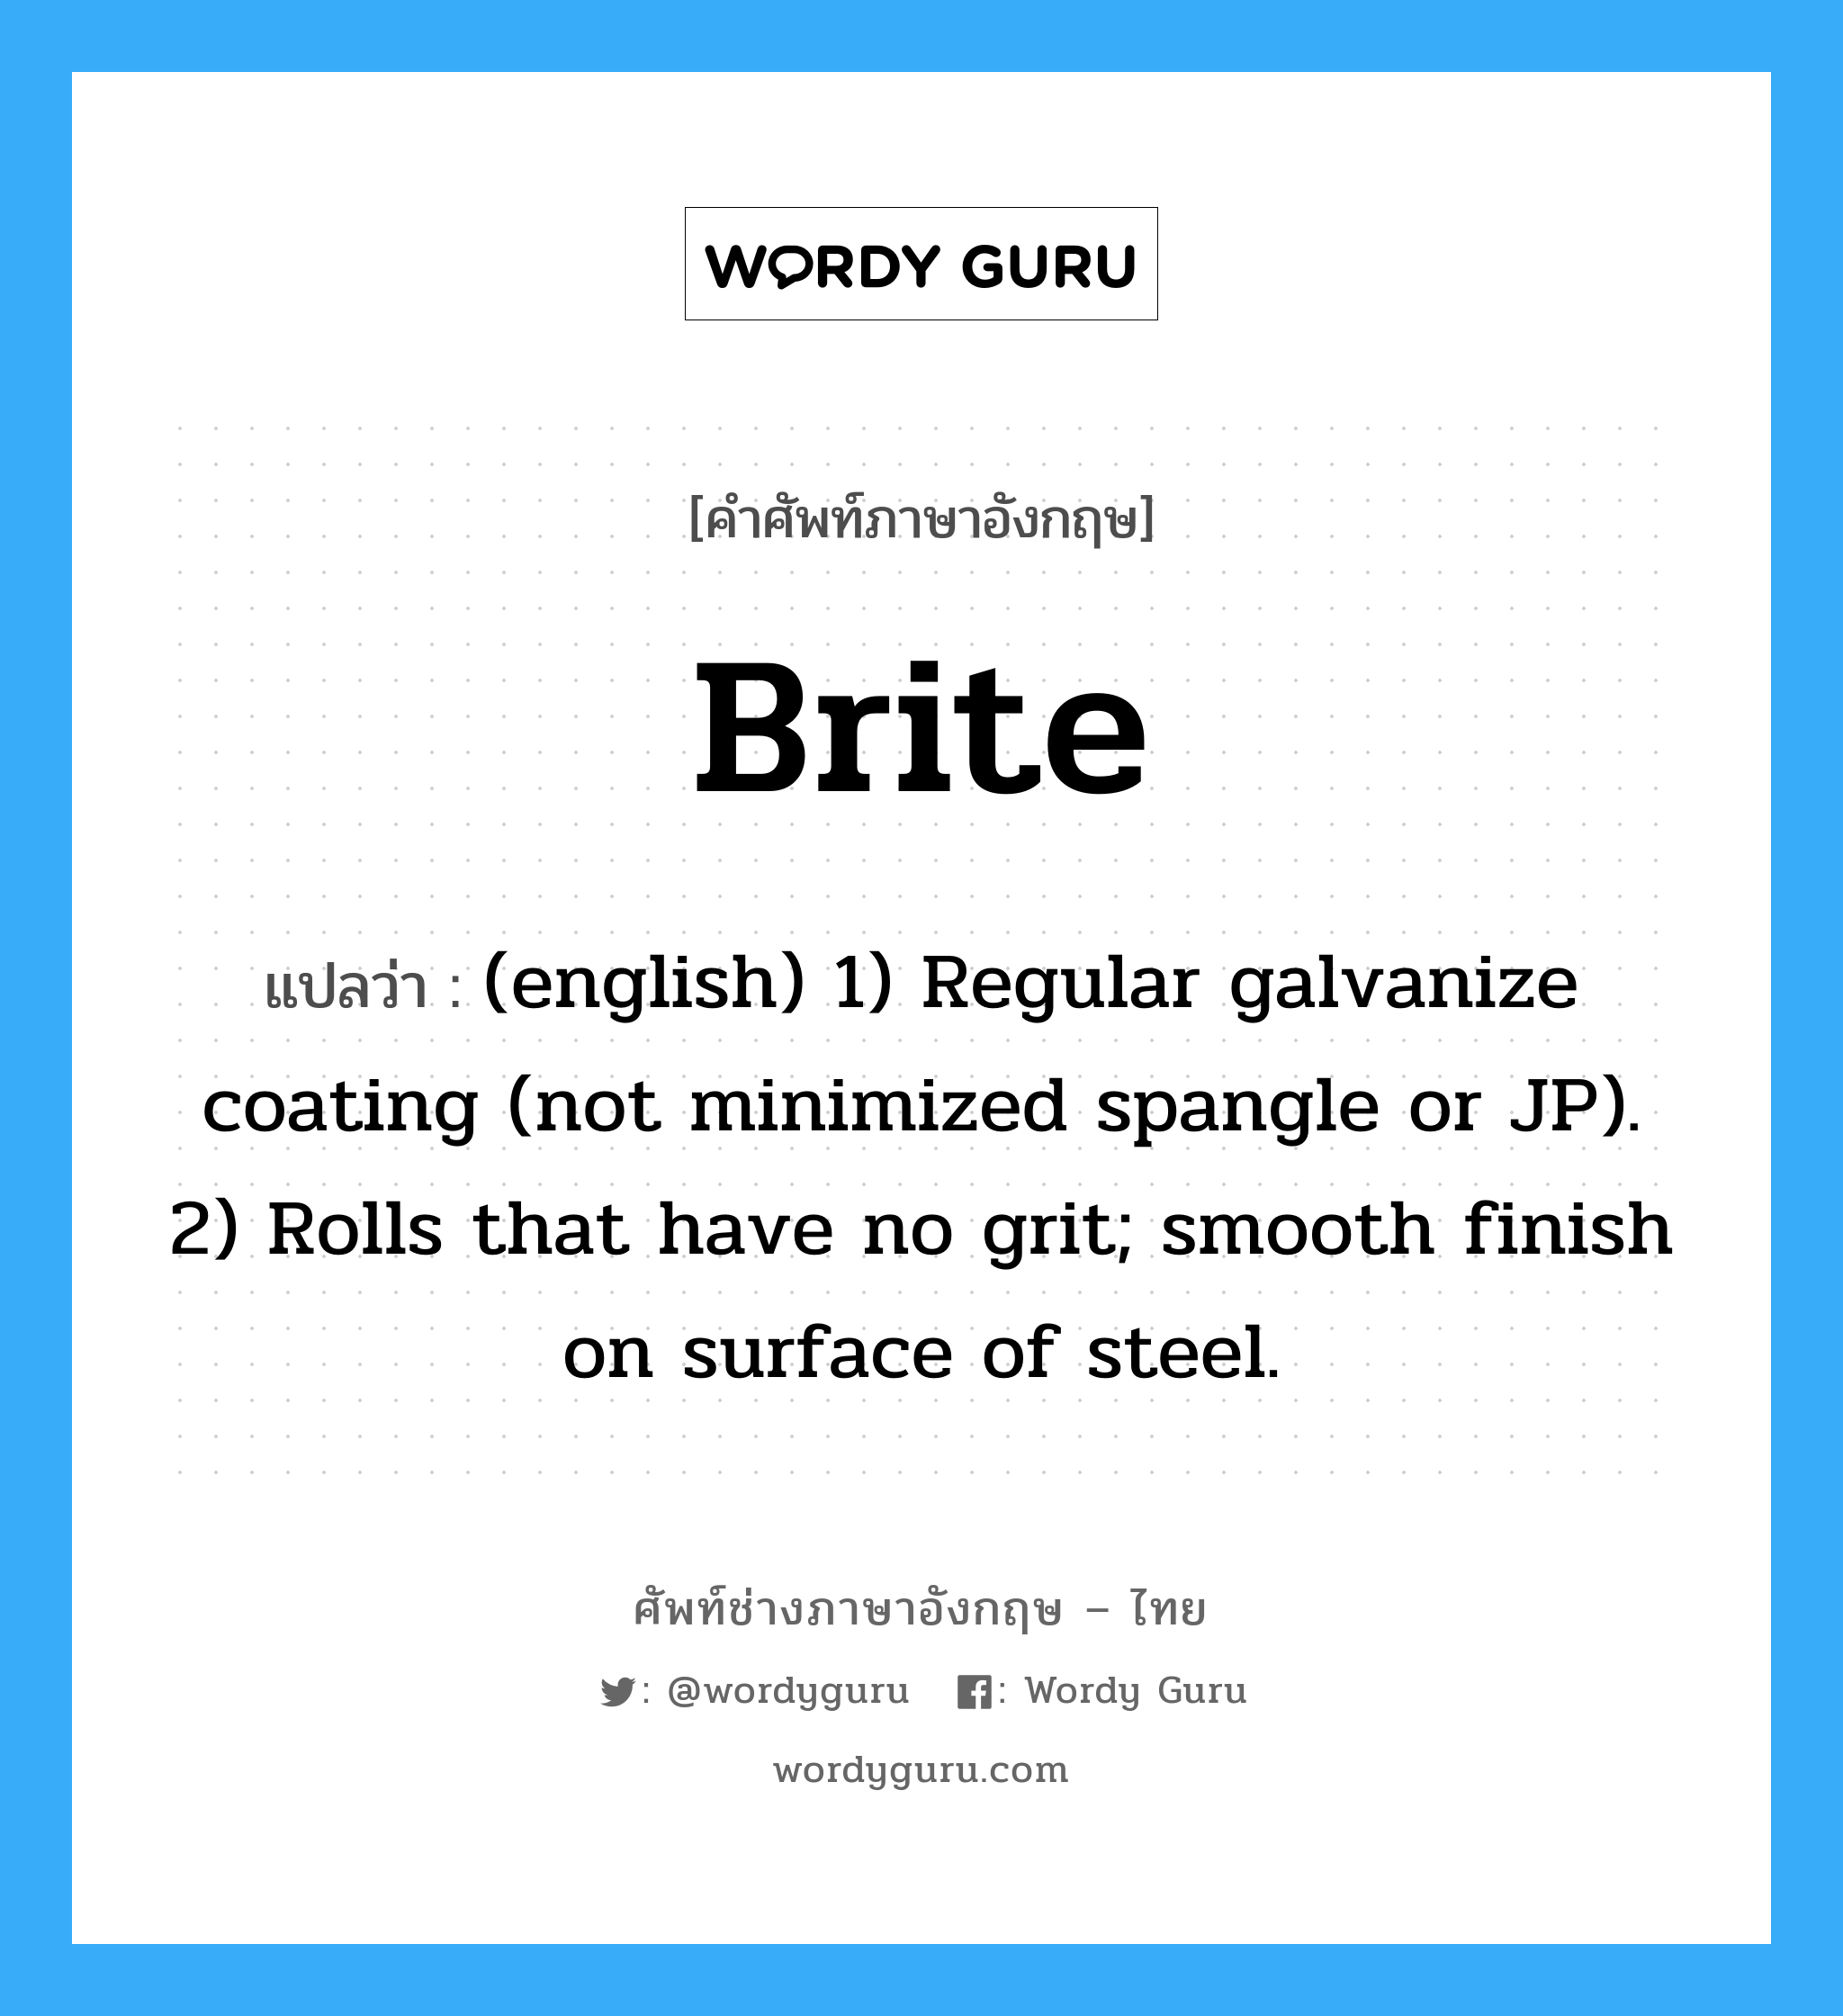 Brite แปลว่า?, คำศัพท์ช่างภาษาอังกฤษ - ไทย Brite คำศัพท์ภาษาอังกฤษ Brite แปลว่า (english) 1) Regular galvanize coating (not minimized spangle or JP). 2) Rolls that have no grit; smooth finish on surface of steel.